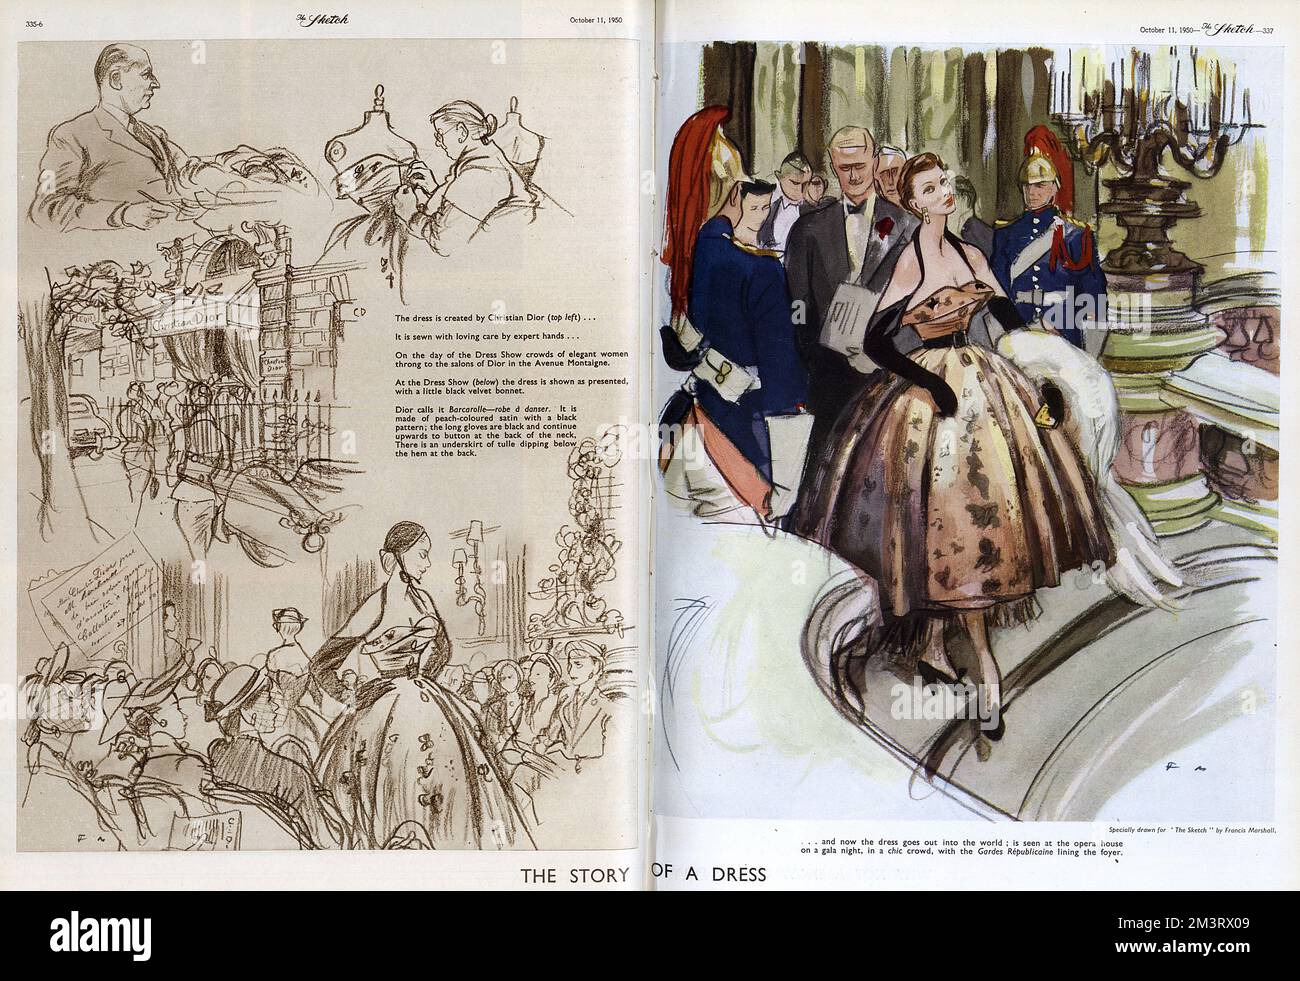 Double page spread from The Sketch drawn by Francis Marshall documenting the different stages of a Christian Dior dress.  Top left the dress is designed by Dior himself while top right shows a seamstress at work.  Left picture (middle) depicts dress show crowds arriving at the salons of Dior at the Avenue Montaigne in Paris and below potential buyers and customers watch mannequins wearing a 'Barcarolle - robe a danser' made of peach coloured satin with a black pattern.  Worn with black gloves that button up behind the neck.  The underskirt of tulle dips below the hem at the back of the skirt Stock Photo